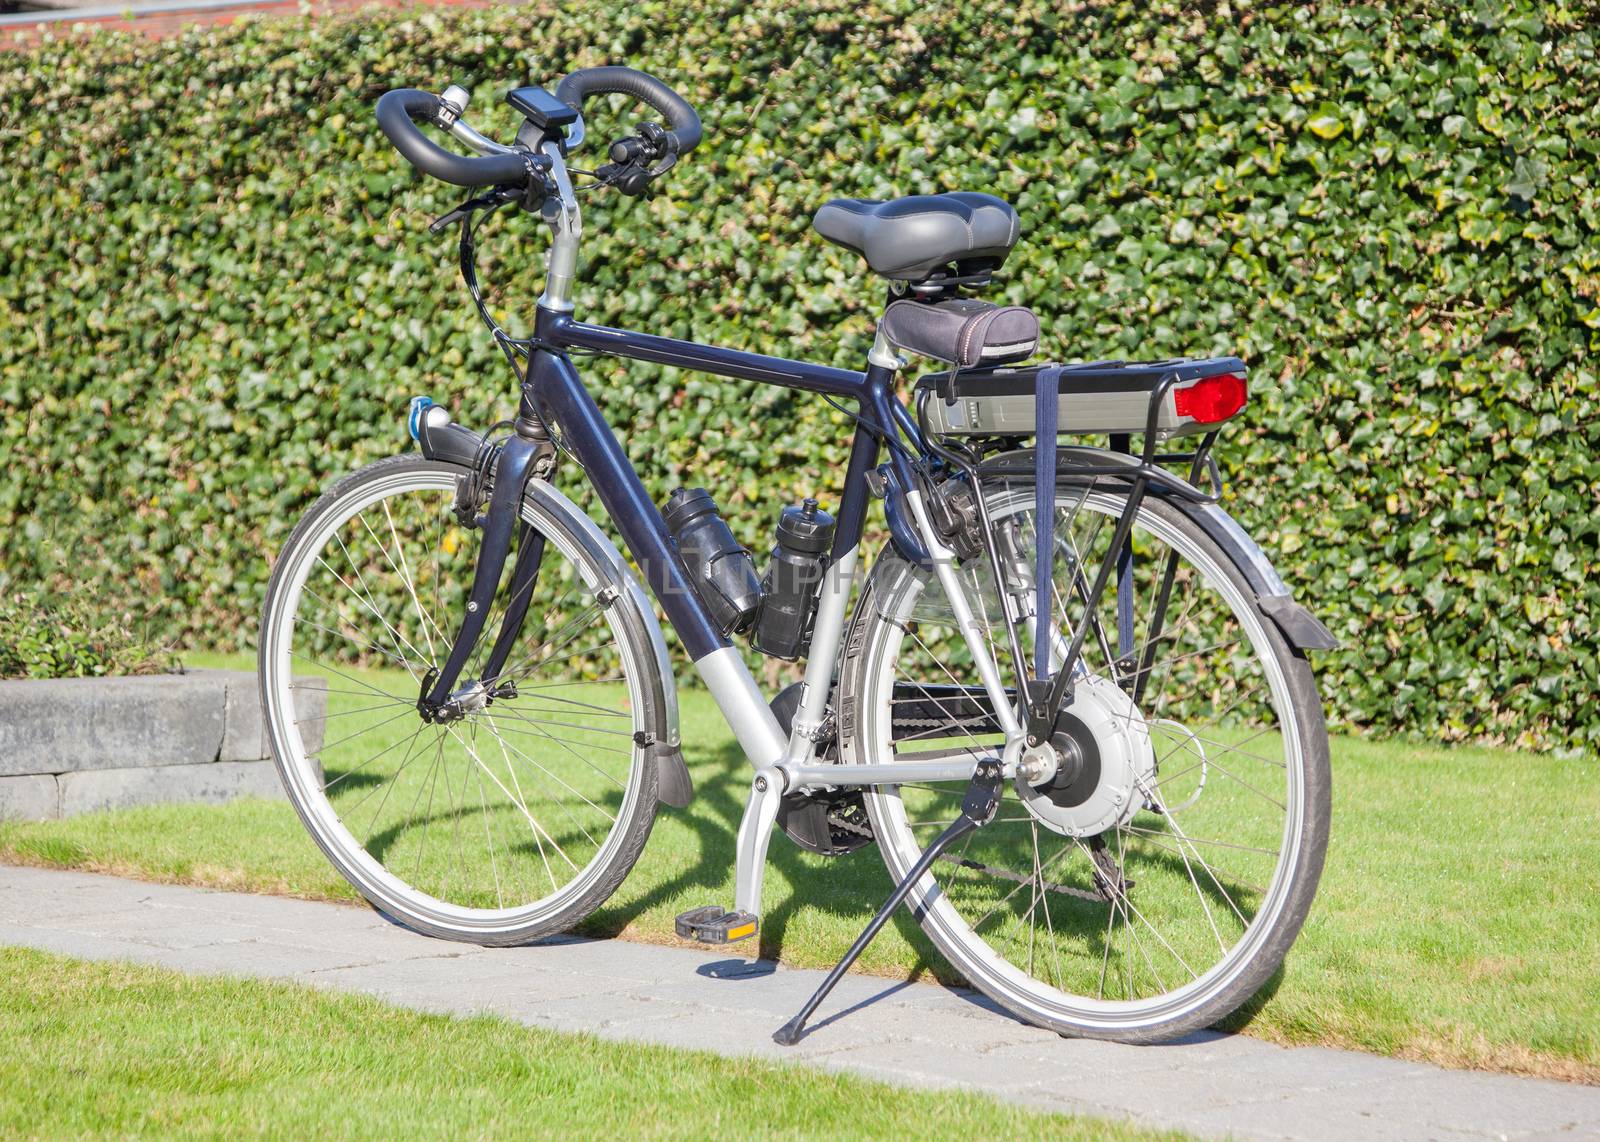 Electric bicycle in the sun by michaklootwijk